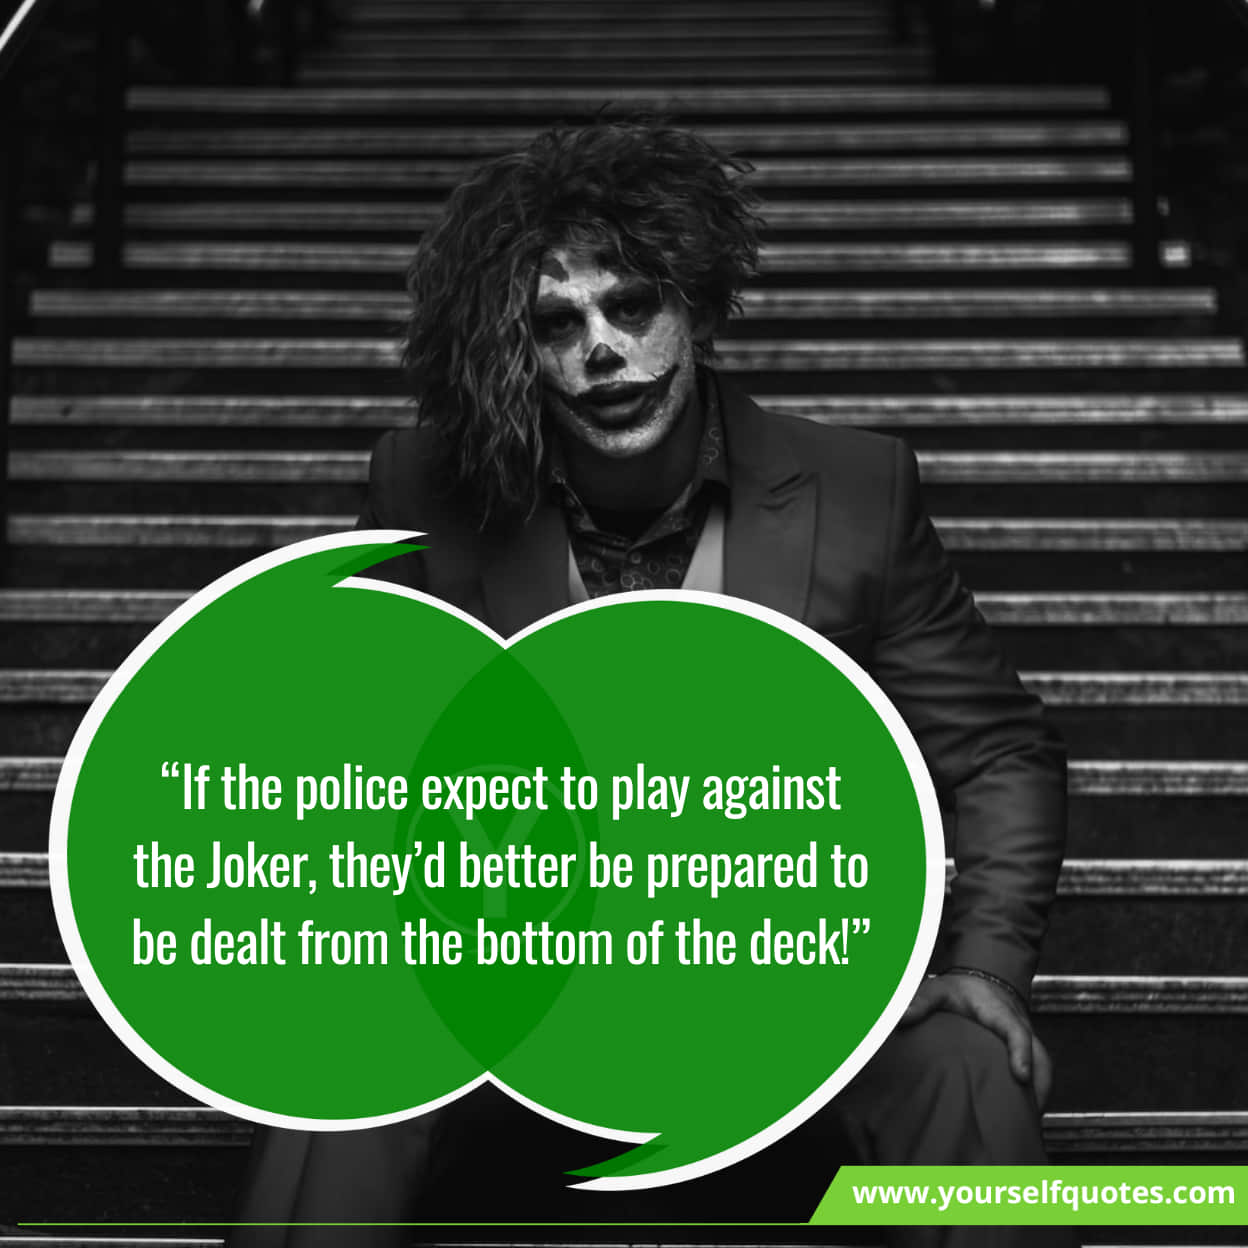 Best Joker Quotes About Life